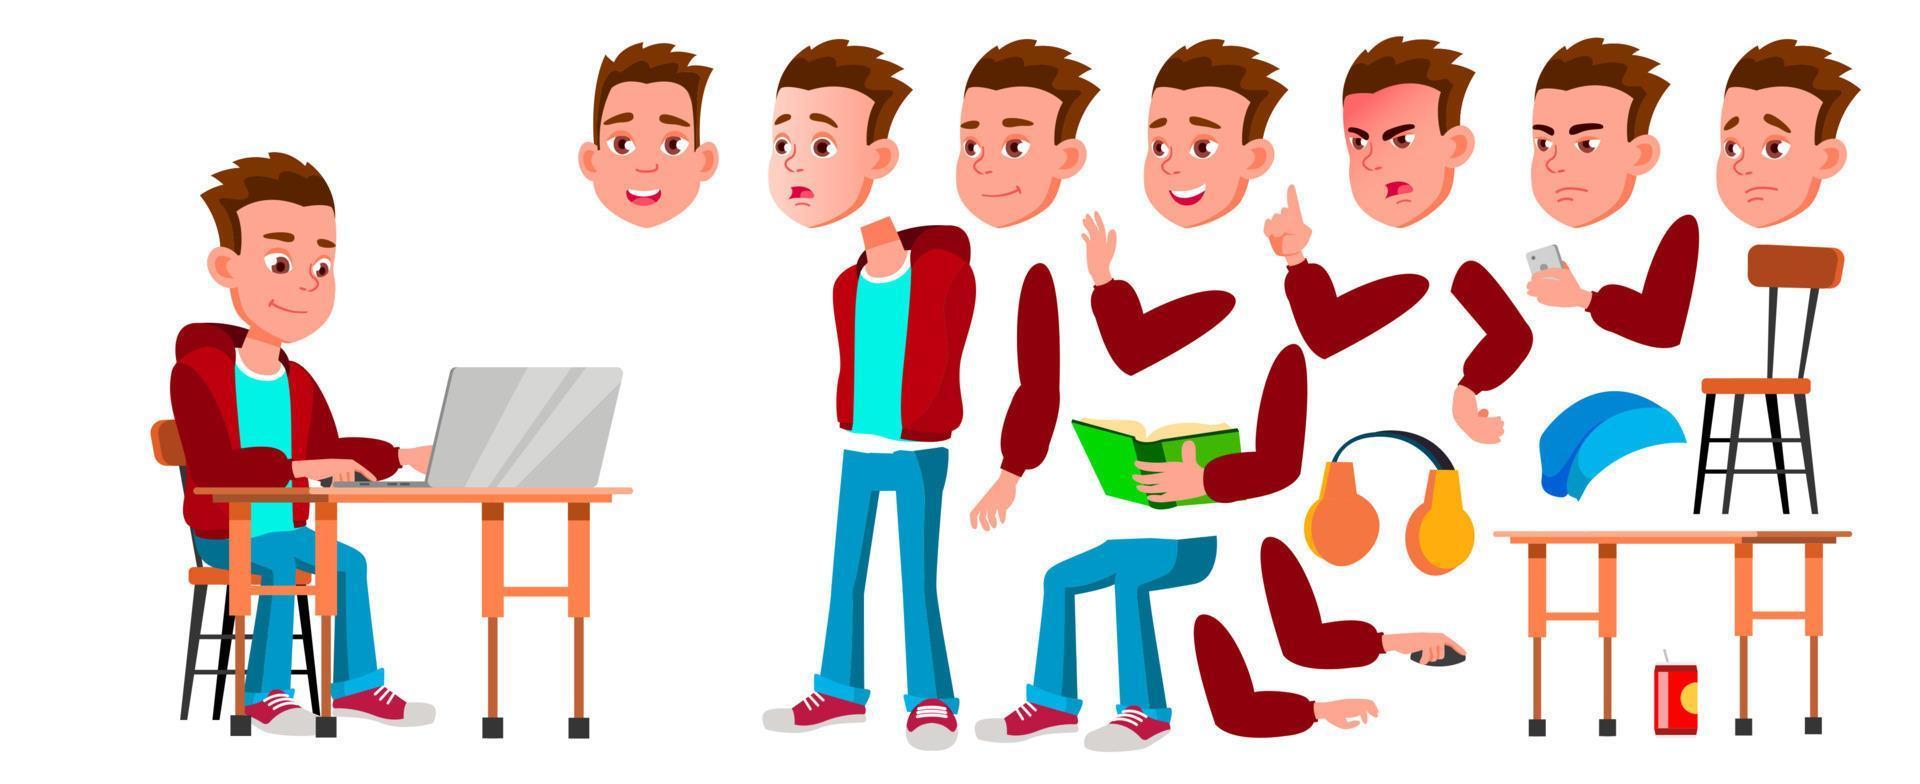 Boy Schoolboy Kid Vector. High School Child. Animation Creation Set. Face Emotions, Gestures. Child Pupil. Subject, Clever, Studying. For Banner, Flyer, Web Design. Animated. Cartoon Illustration vector